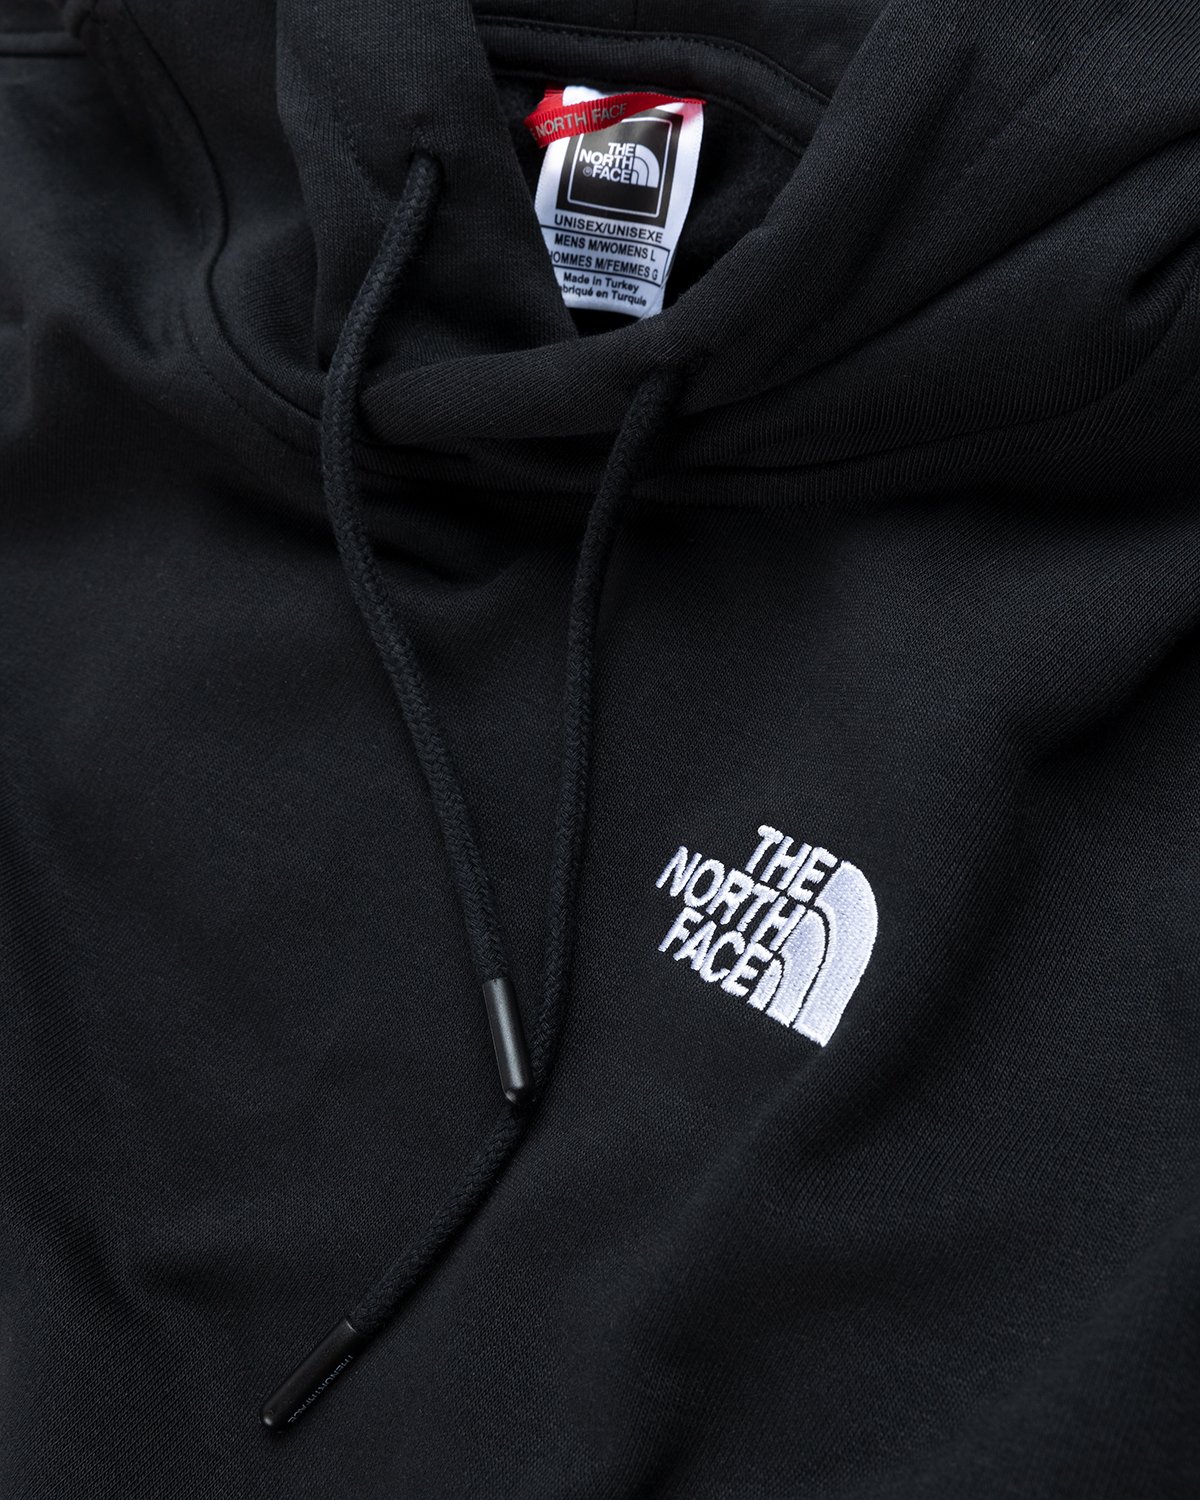 The North Face - Oversized Essential Hoodie Black - Clothing - Black - Image 3